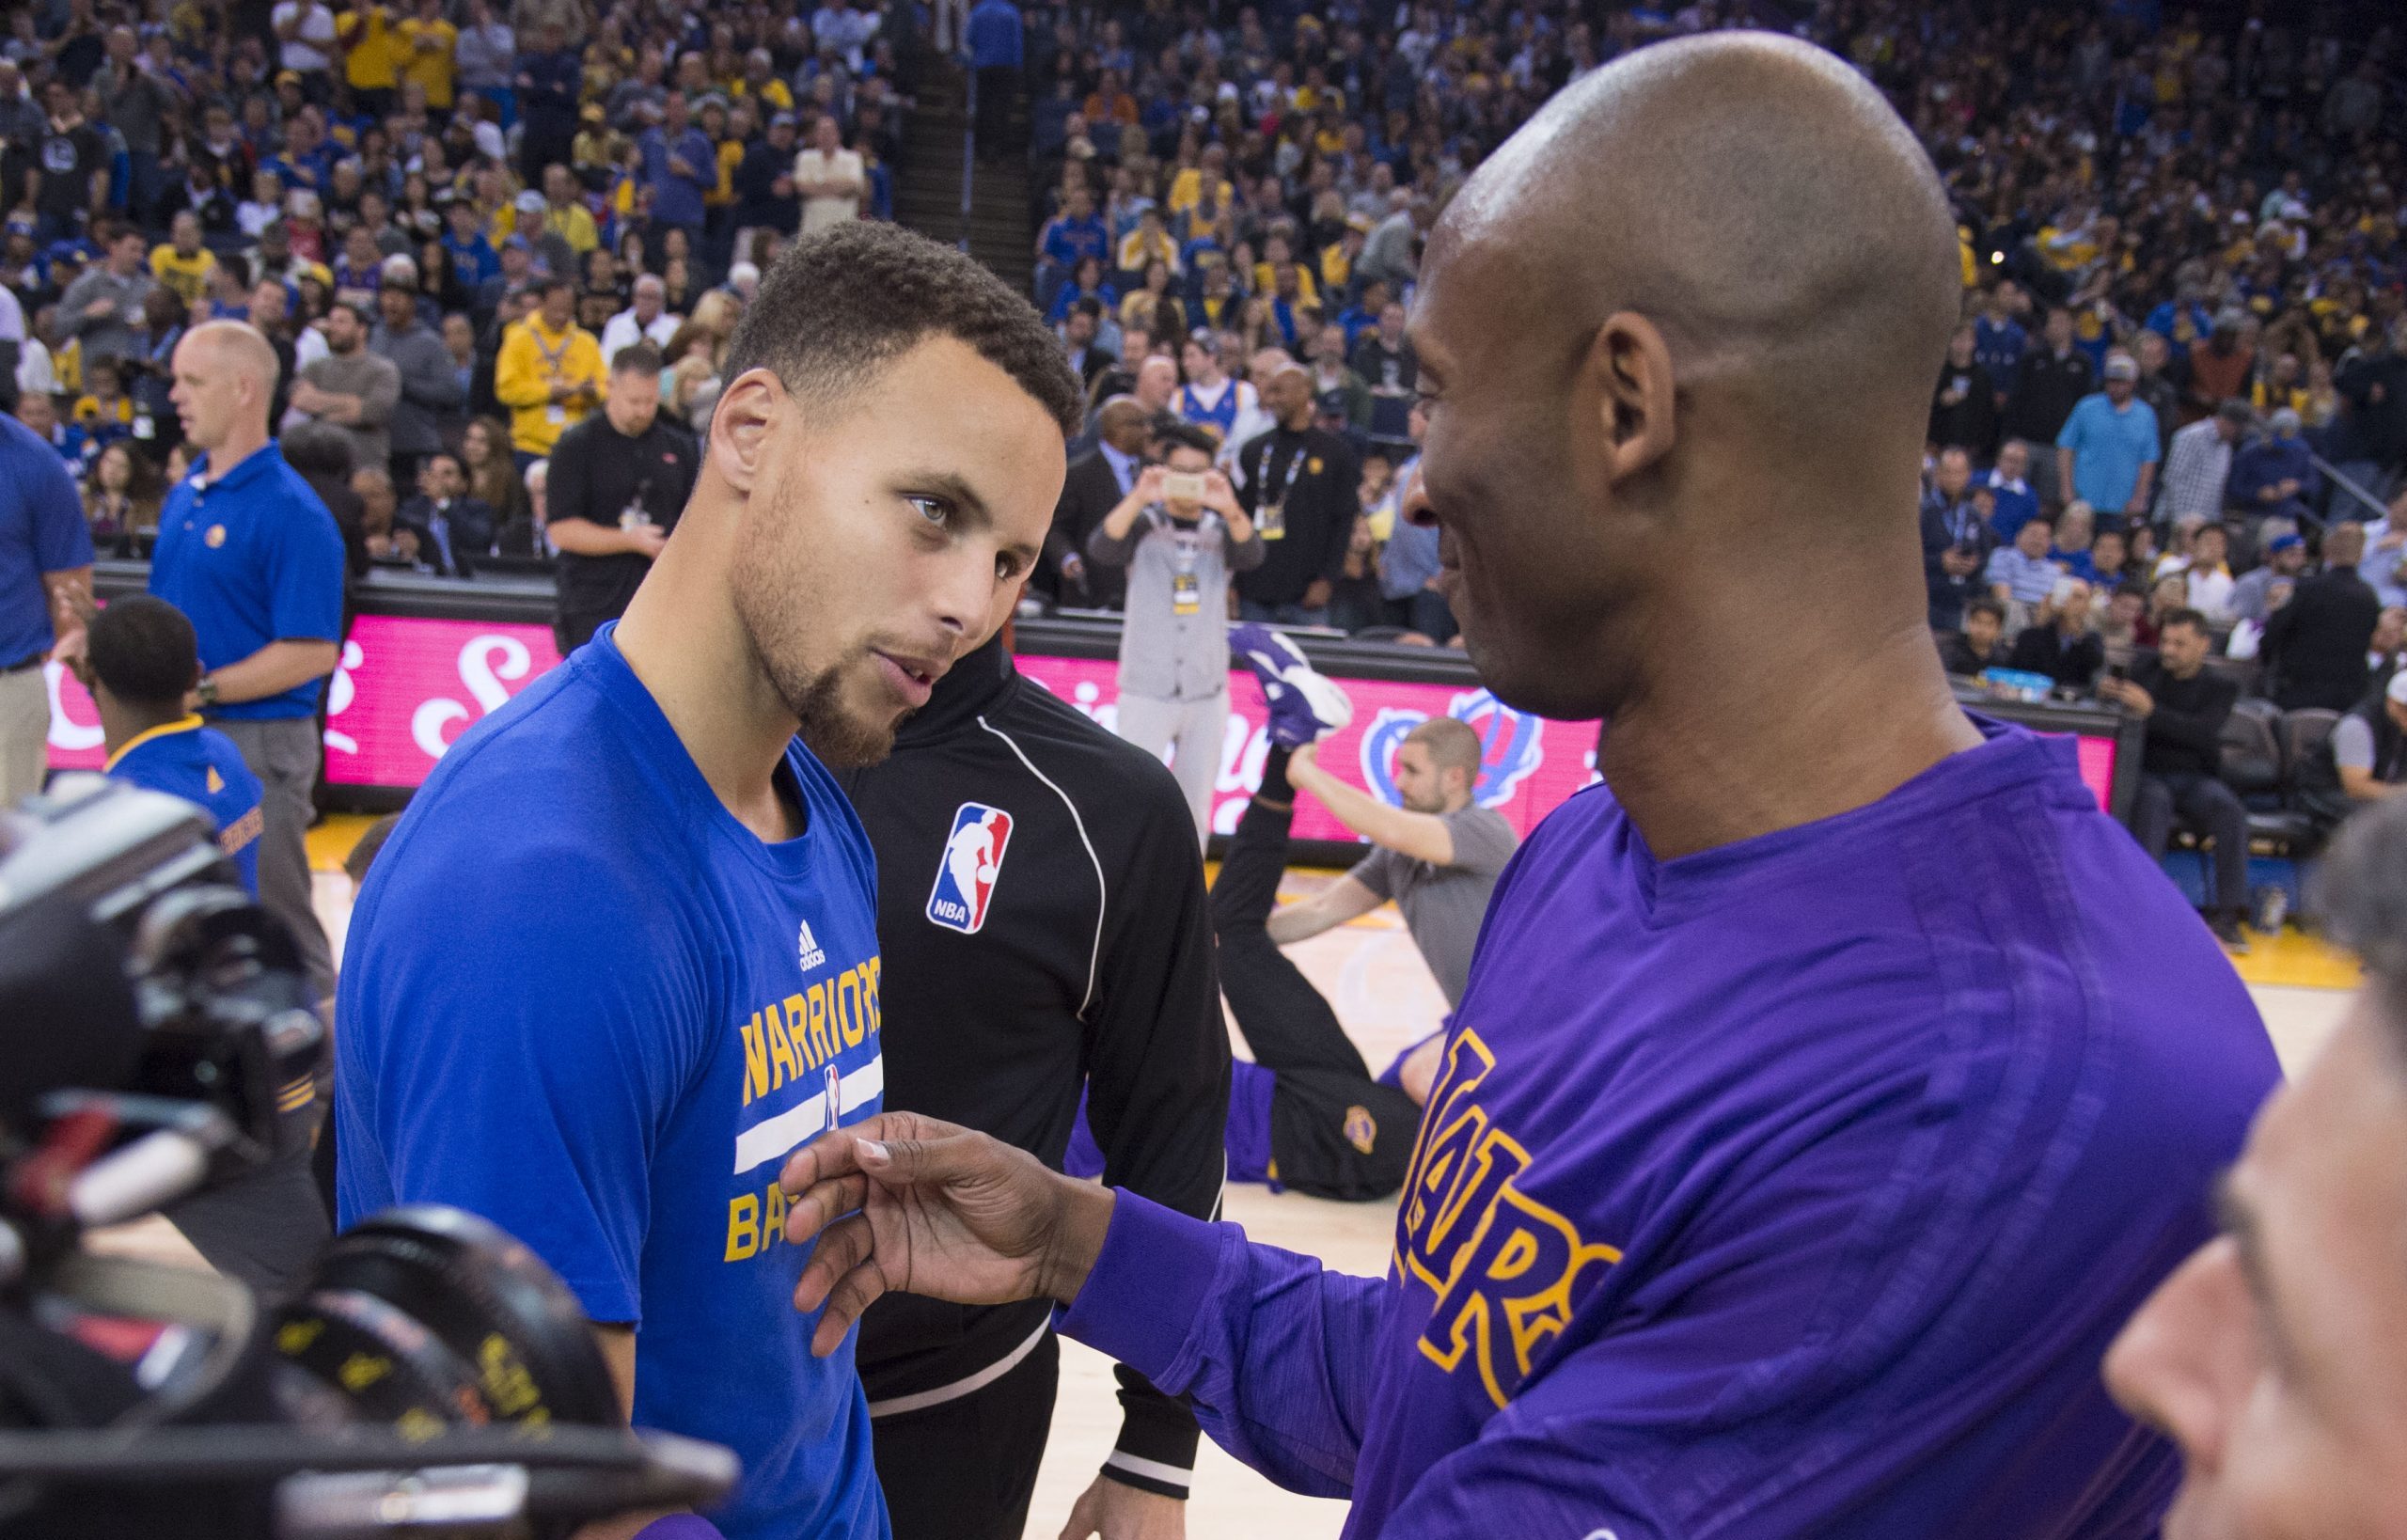 Kendrick Perkins is picking Steph Curry over Kobe Bryant all-time: ‘It’s not an easy one’ - The Comeback